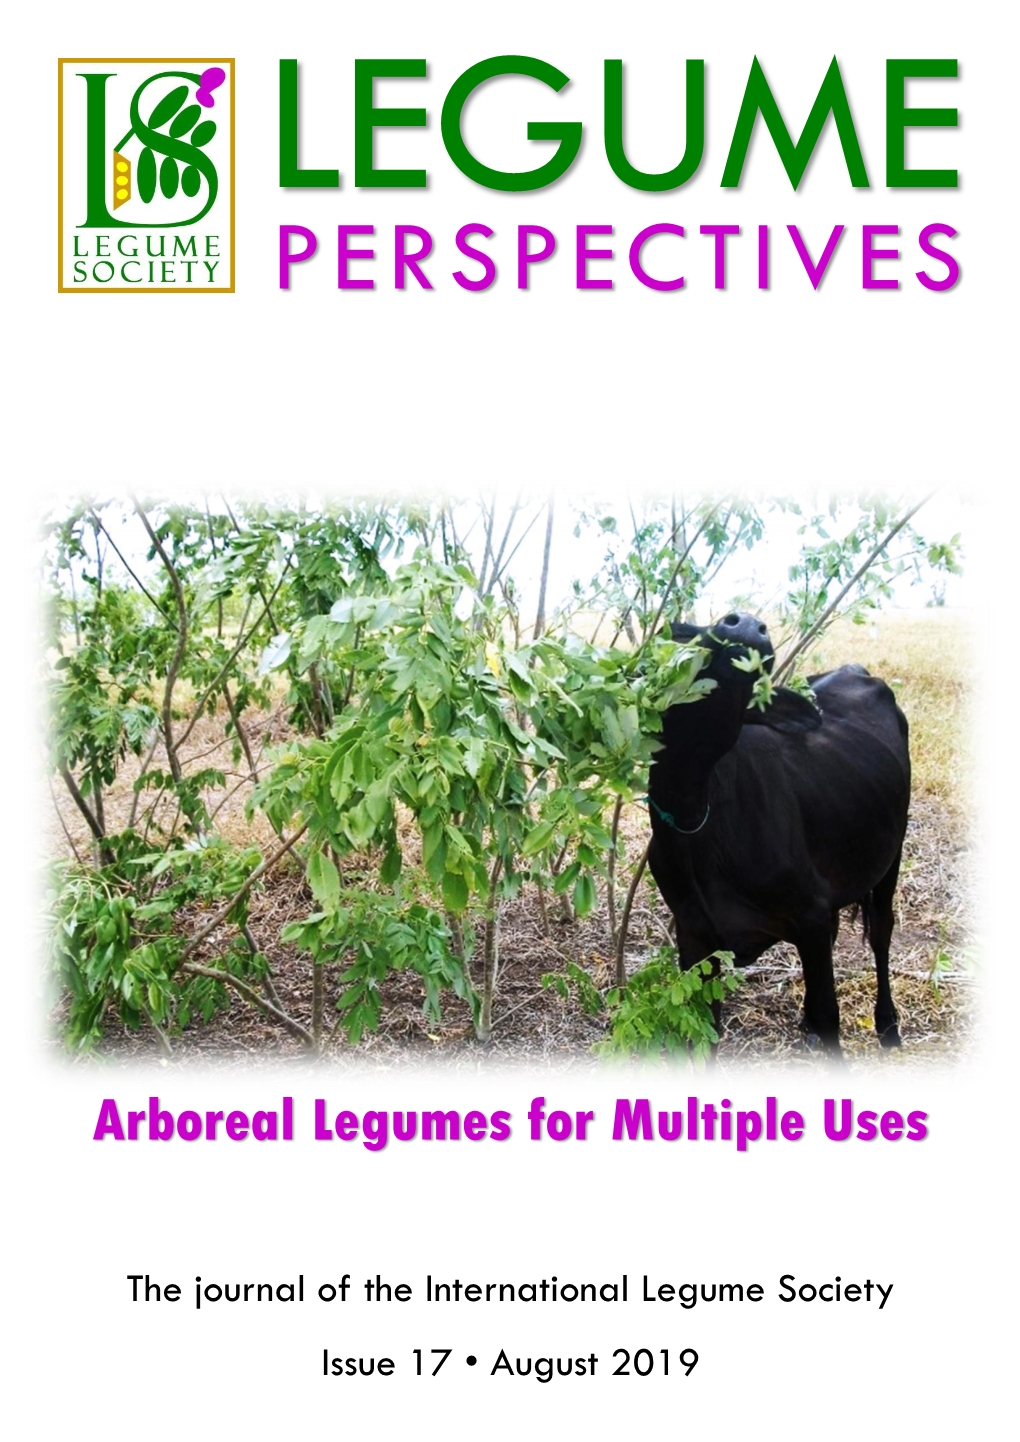 Arboreal Legumes for Multiple Uses